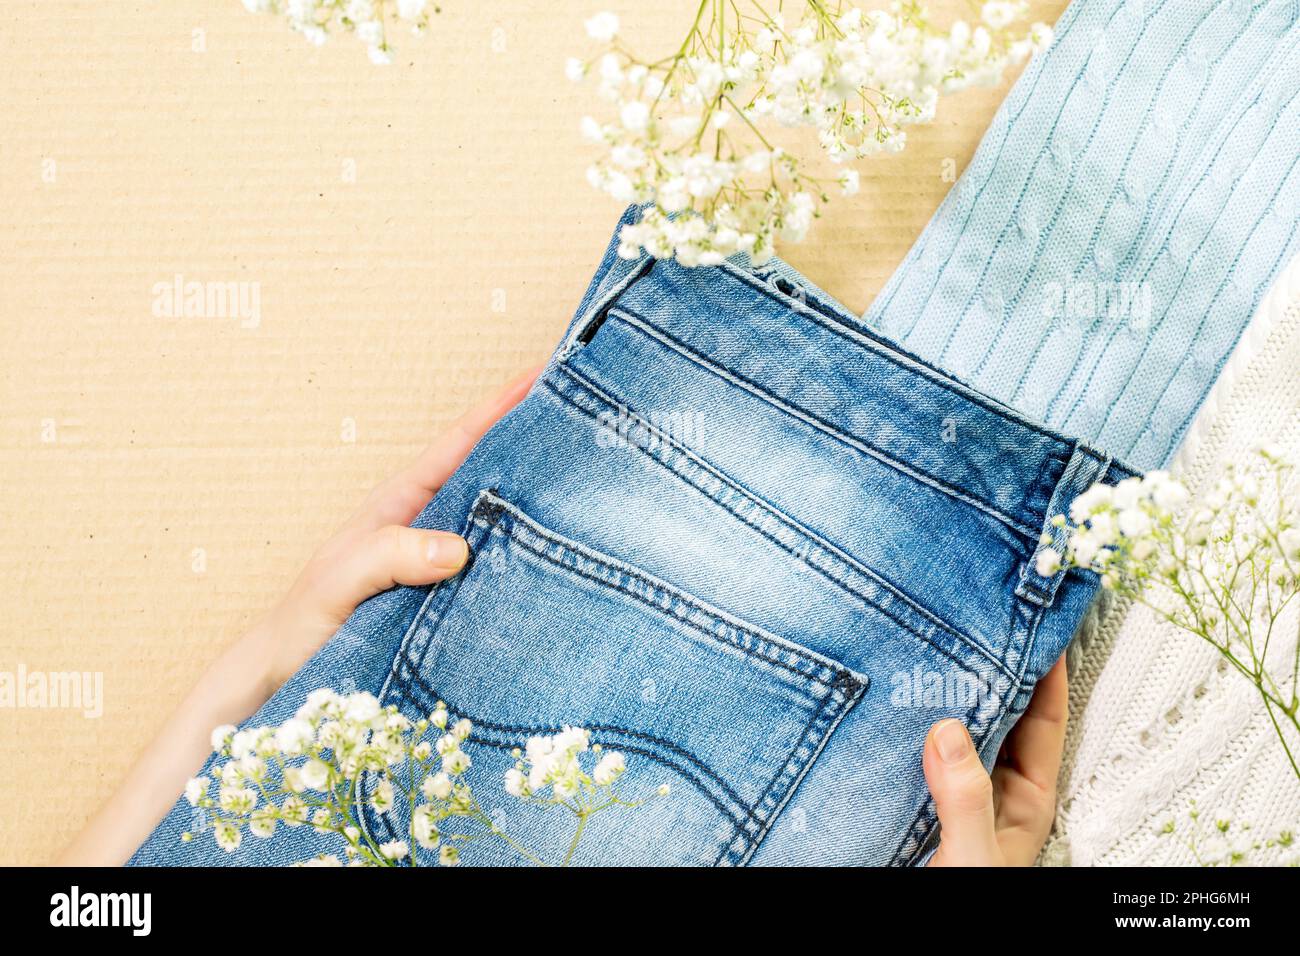 Second hand concept. Sustainable life style with female hands holding jeans near sweaters on cardboard background. Circular fashion, eco friendly sust Stock Photo